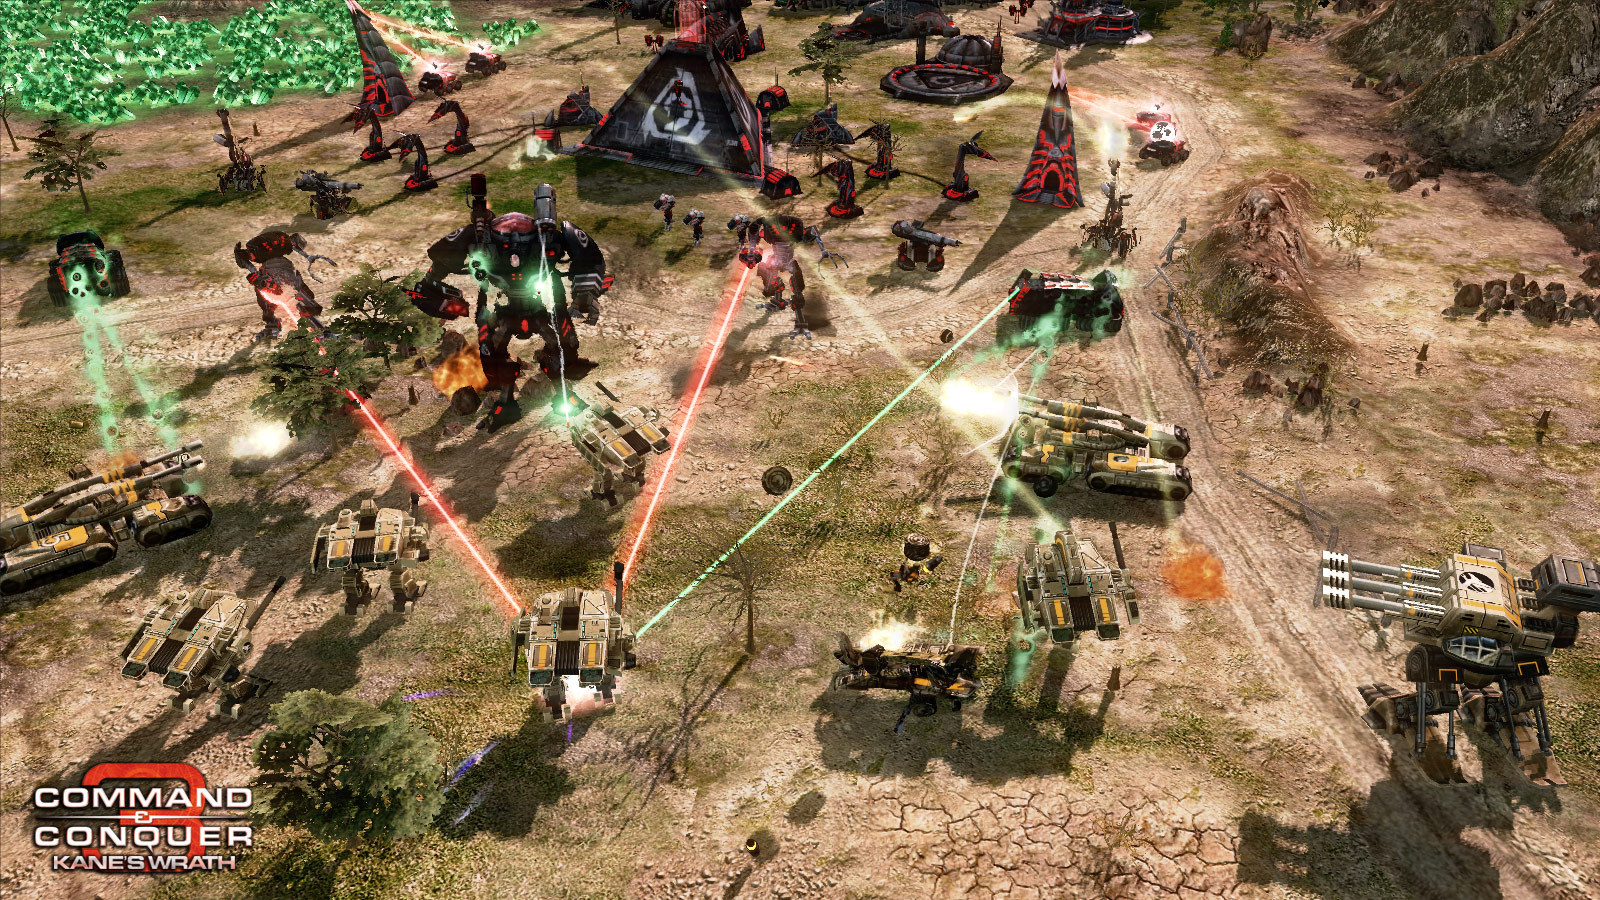 Command and conquer 3 kane wrath gameplay pc